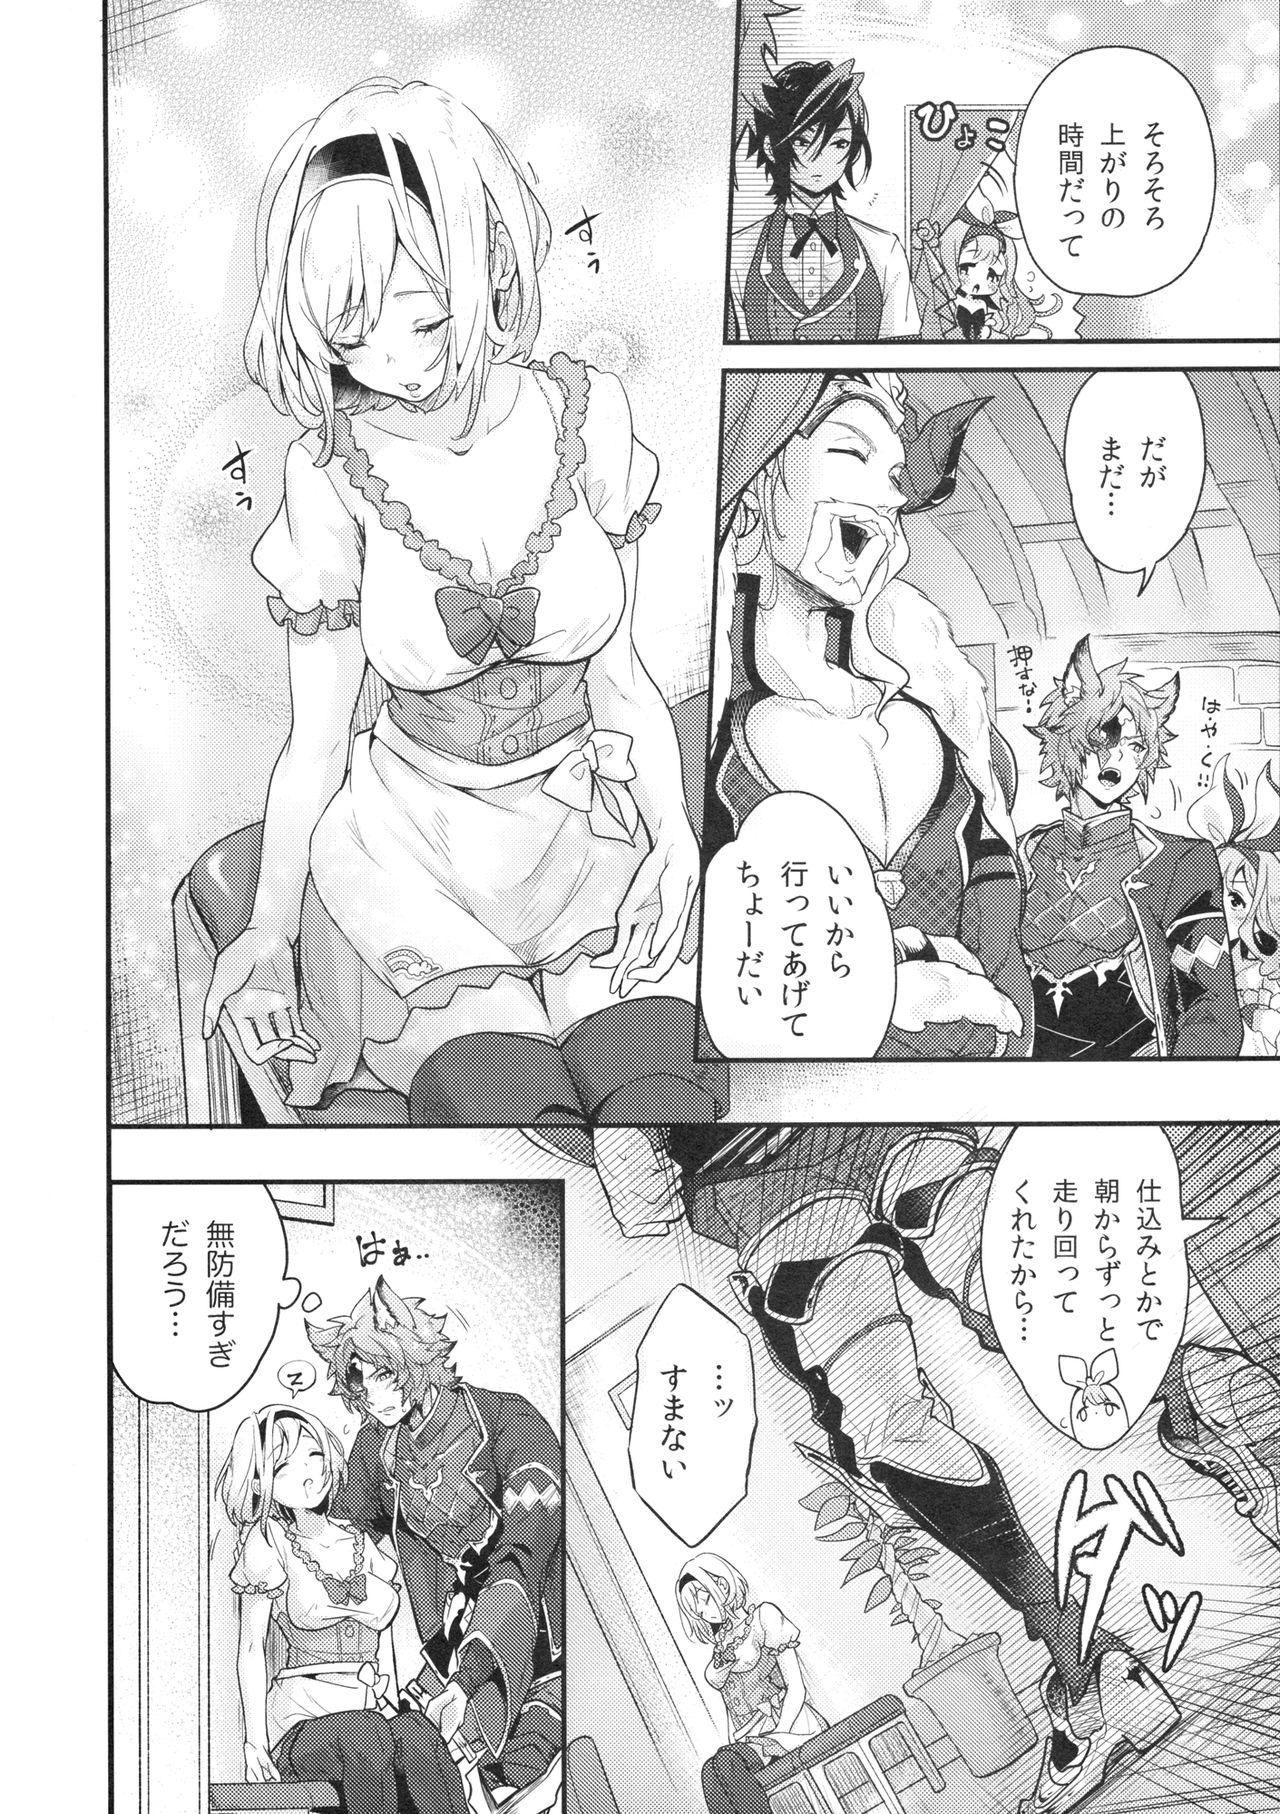 Scandal dear sweat - Granblue fantasy Squirting - Page 9